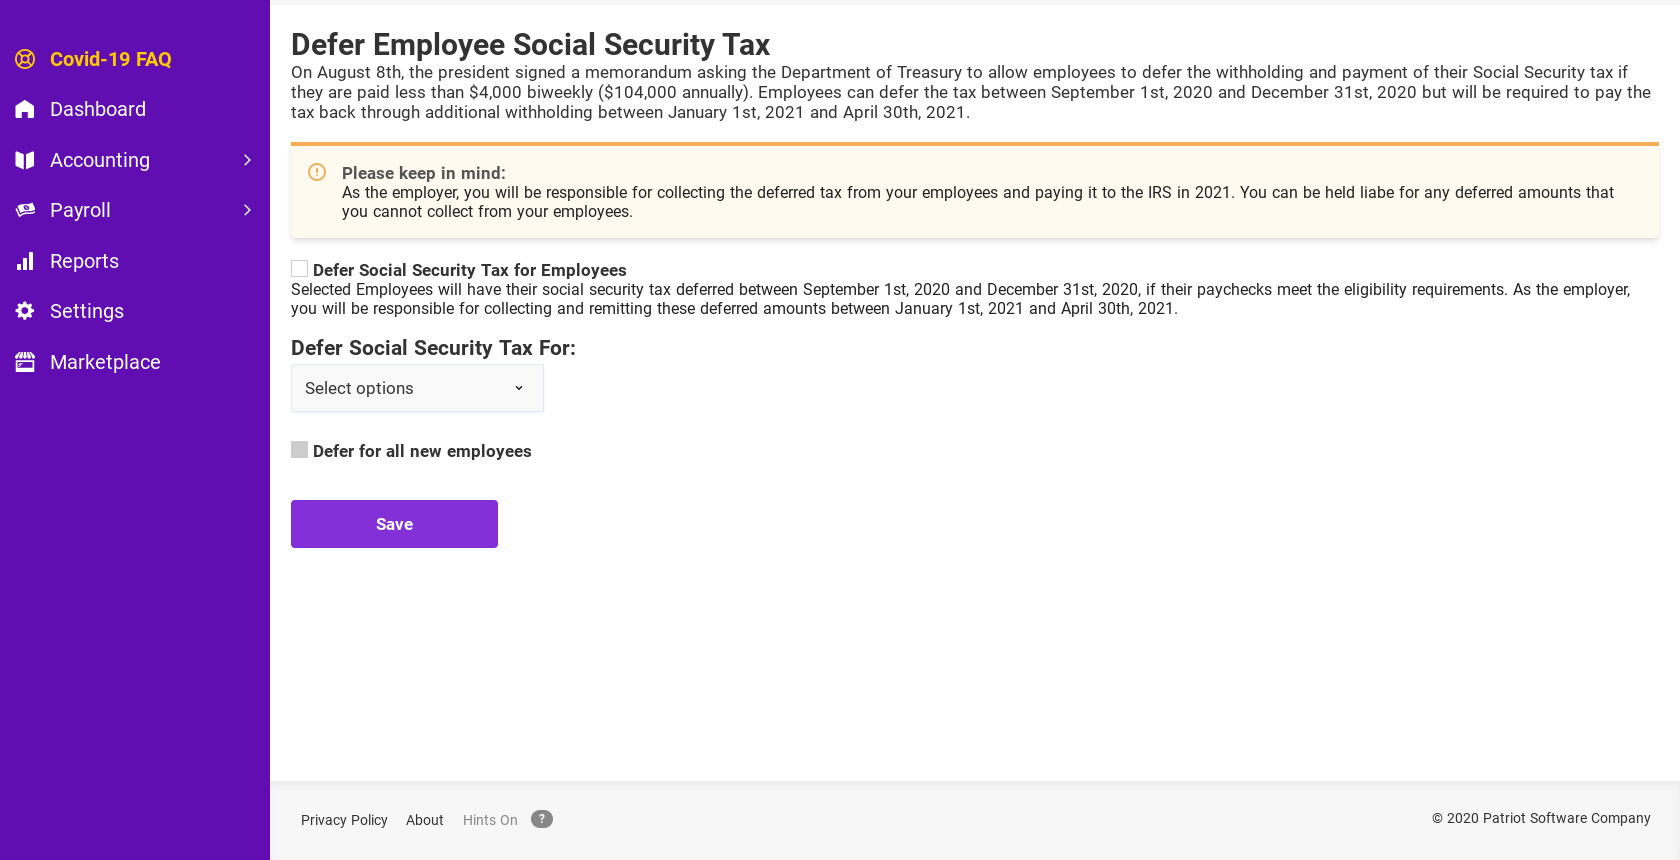 how to defer employee social security tax in patriot software